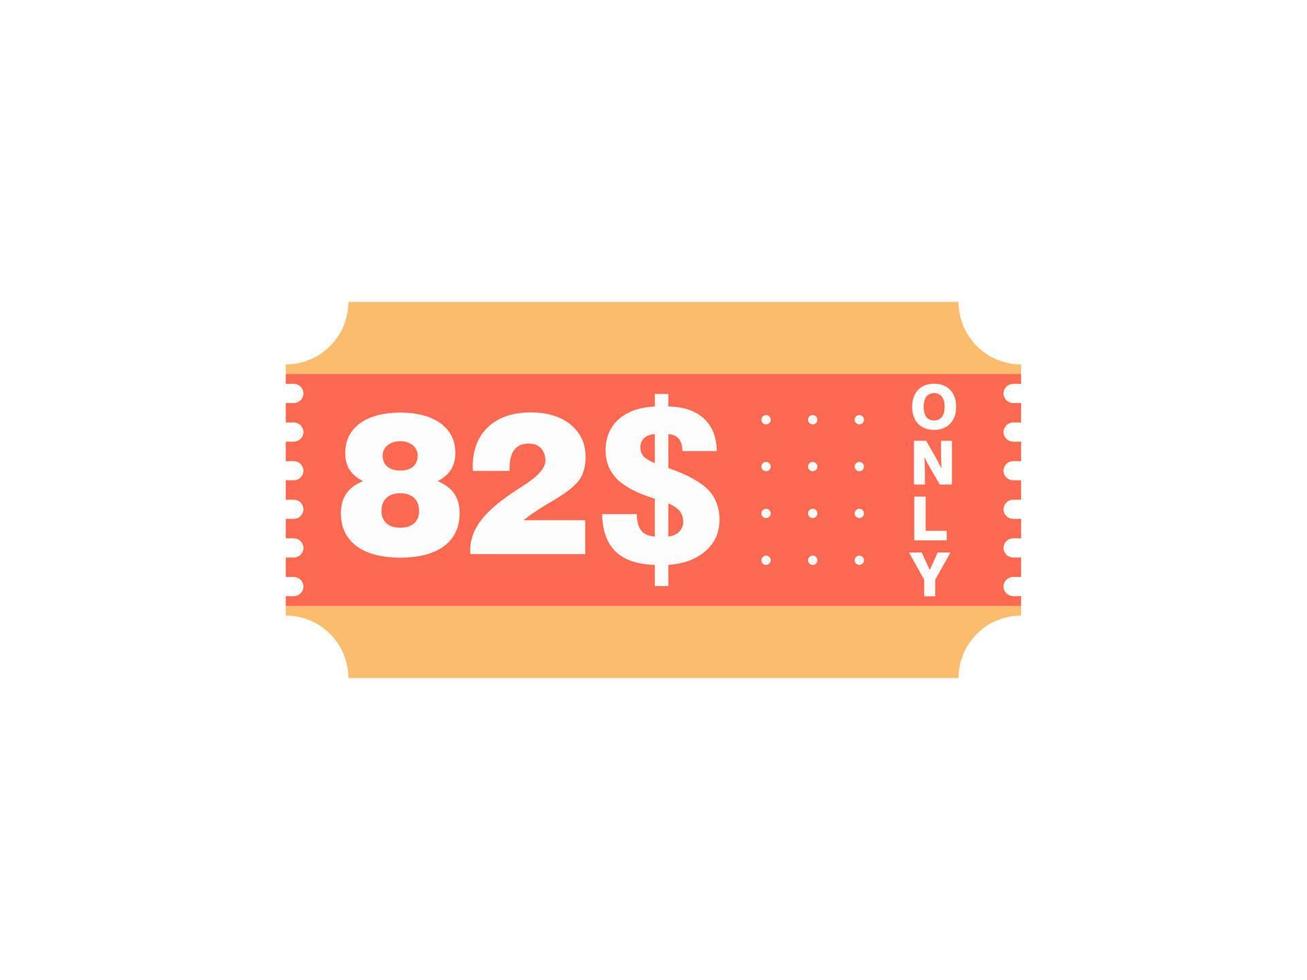 82 Dollar Only Coupon sign or Label or discount voucher Money Saving label, with coupon vector illustration summer offer ends weekend holiday